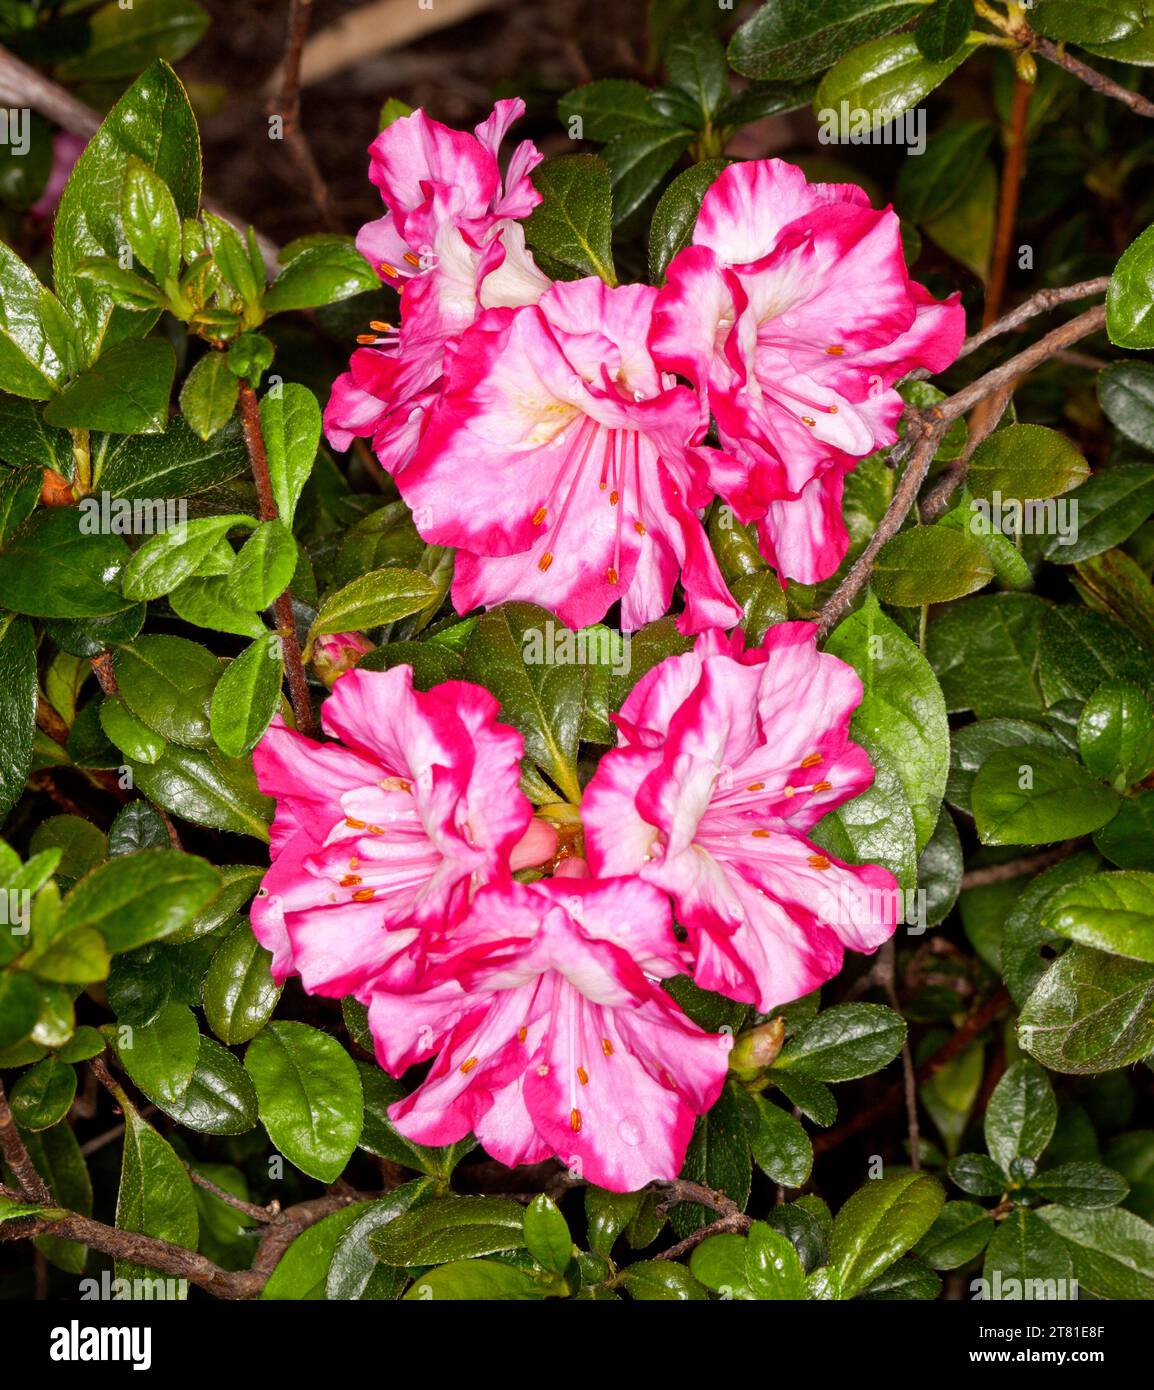 Spectacular red and white streaked flowers of Azalea indica 'Gay Paree' against background of green foliage - in Australia Stock Photo